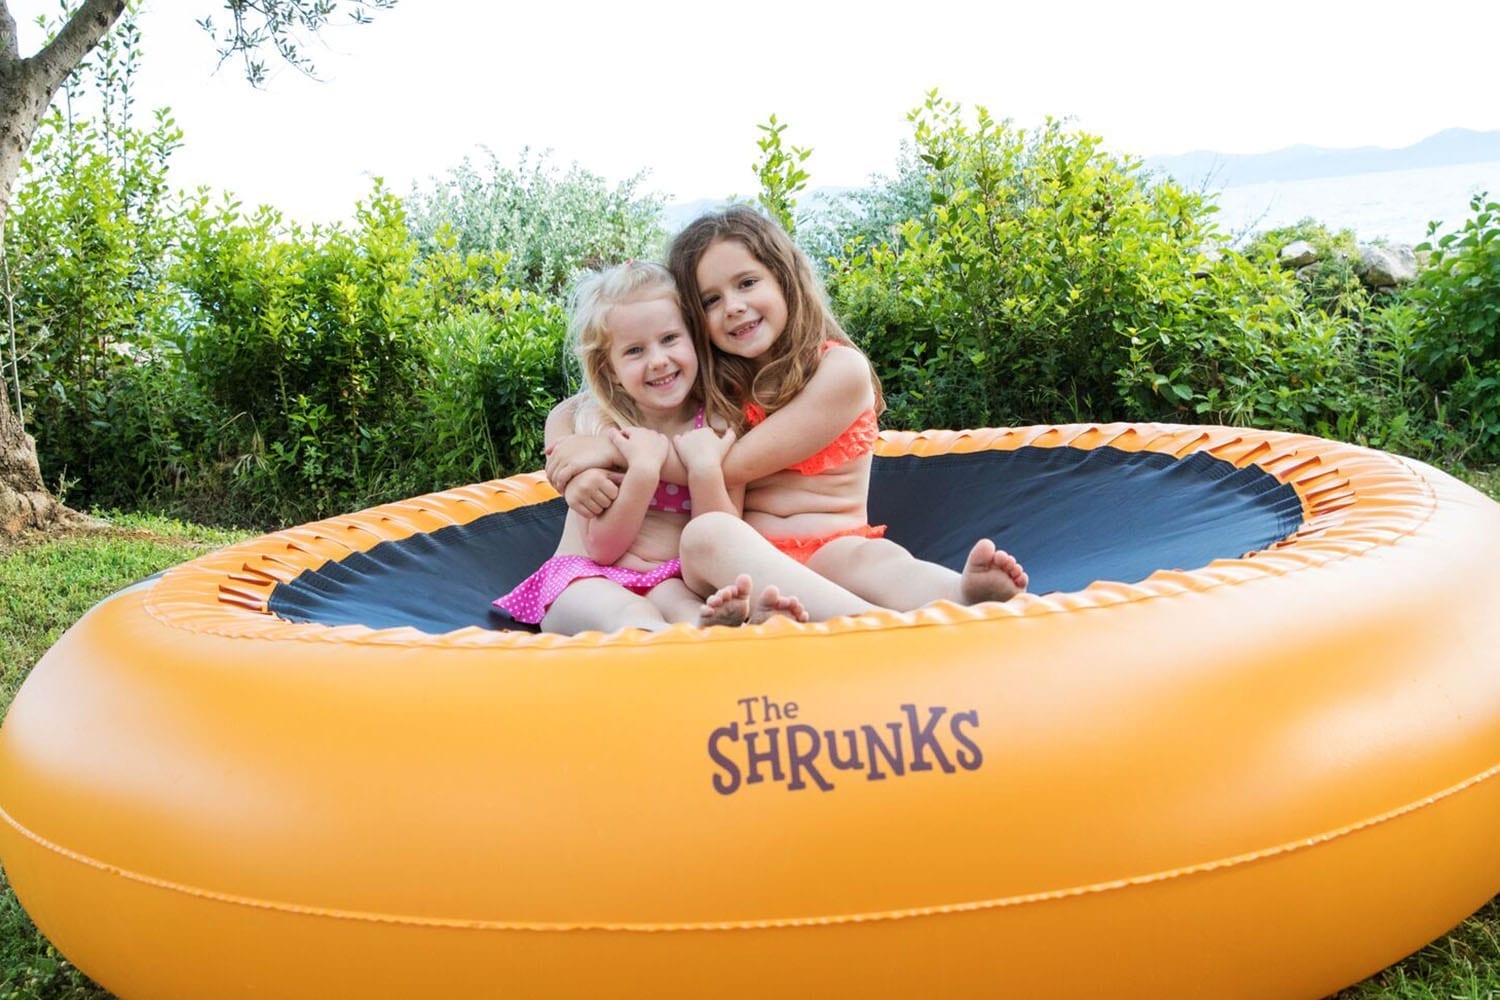 Orange The Shrunks Inflatable 2-in-1 Safety Bouncer Pool Portable Indoor or Outdoor Use with Soft Bounce for Toddlers Safety Renewed 72 x 72 inches 